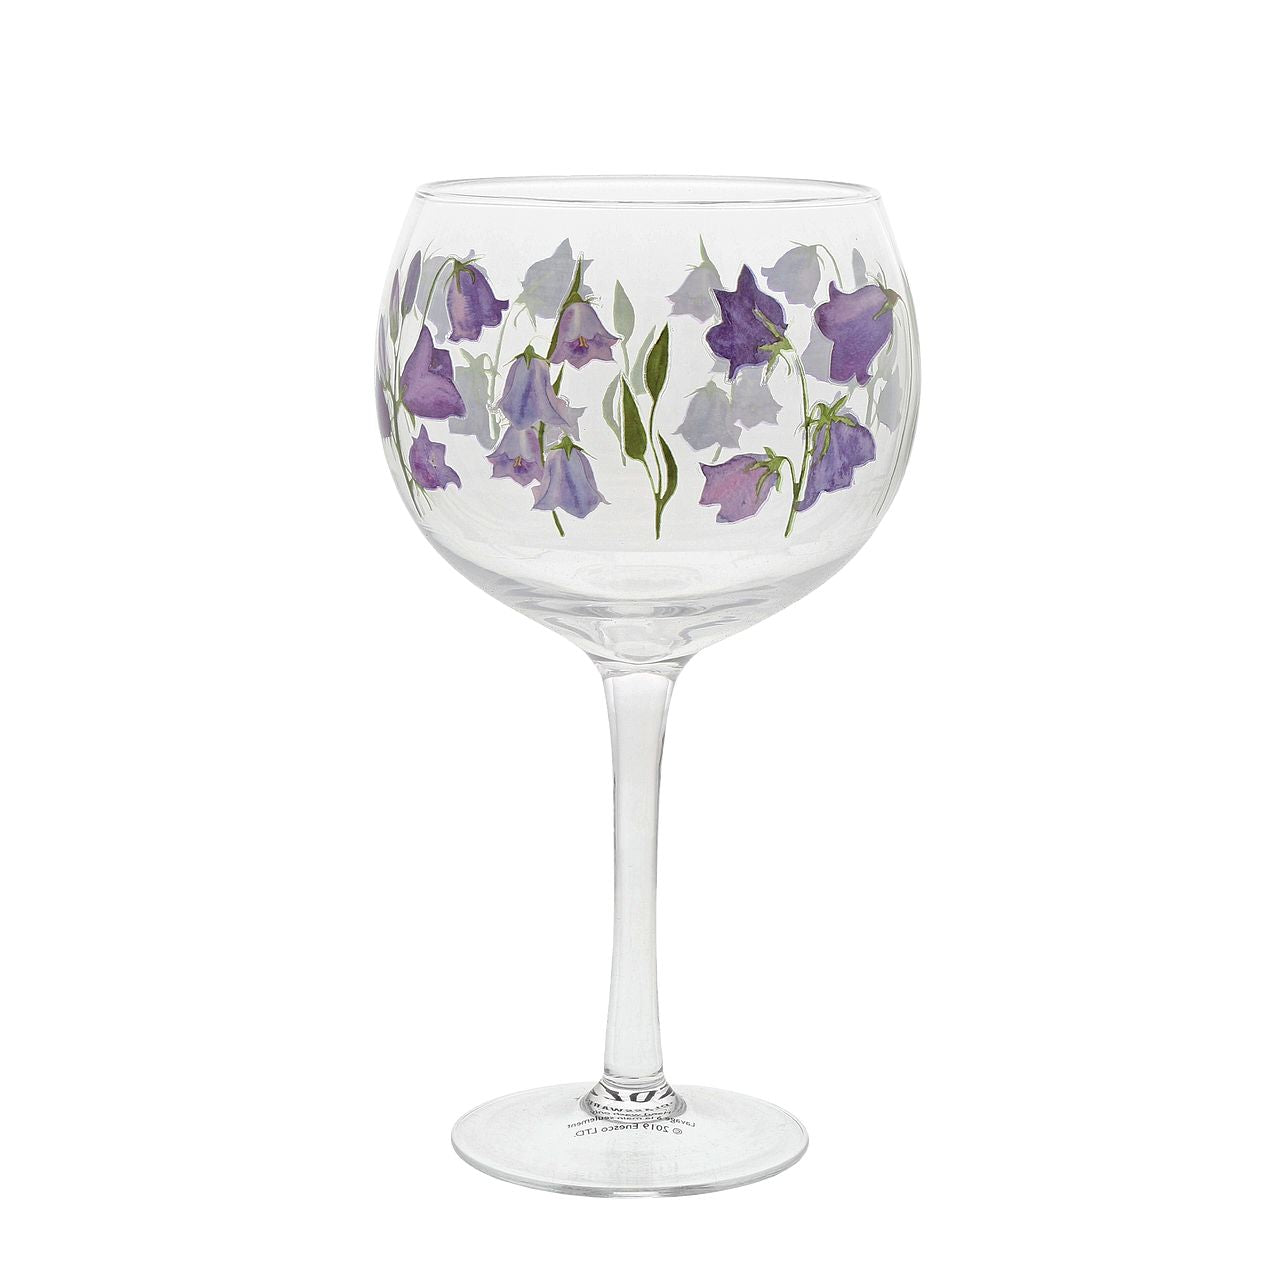 Ginology Bluebell Copa Gin Glass  Beautiful in blue, this Bluebell Gin glass is perfect for your garden parties. We recommend pairing our Bluebell glass with a premium Gin and a floral tonic Garnish with pretty blue flowers to make your drink look even cuter.